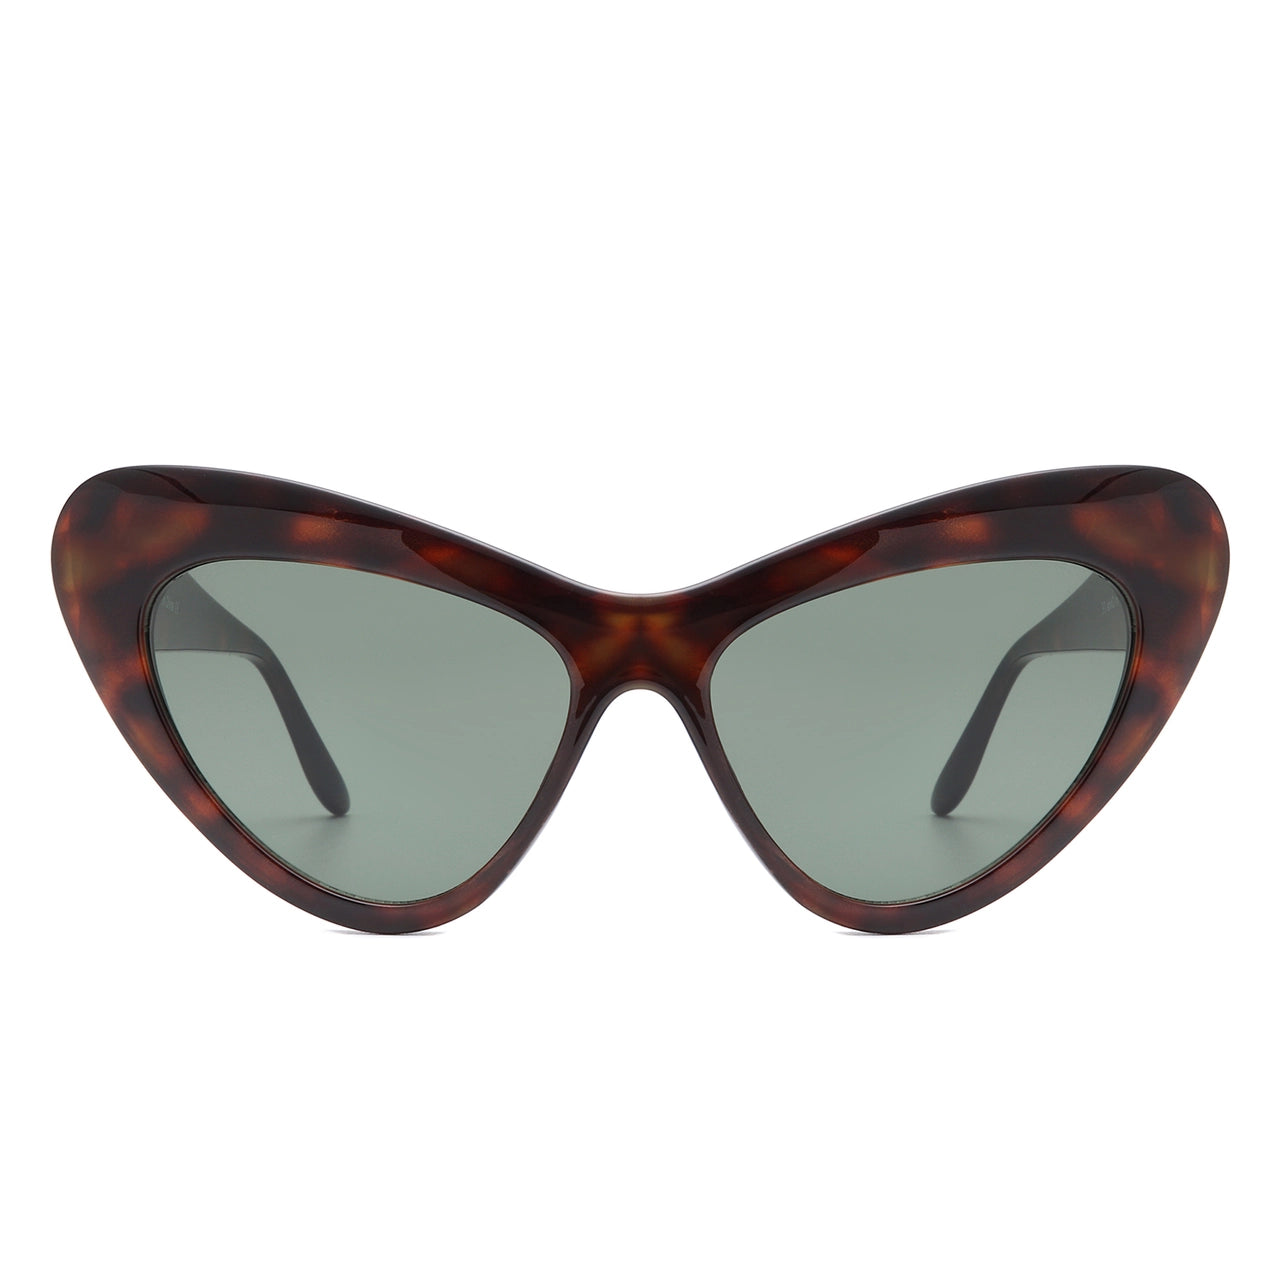 Dark brown tortoiseshell plastic rounded cat eye sunglasses with a curved bevel detail at each temple and dark green lenses. Shown from front